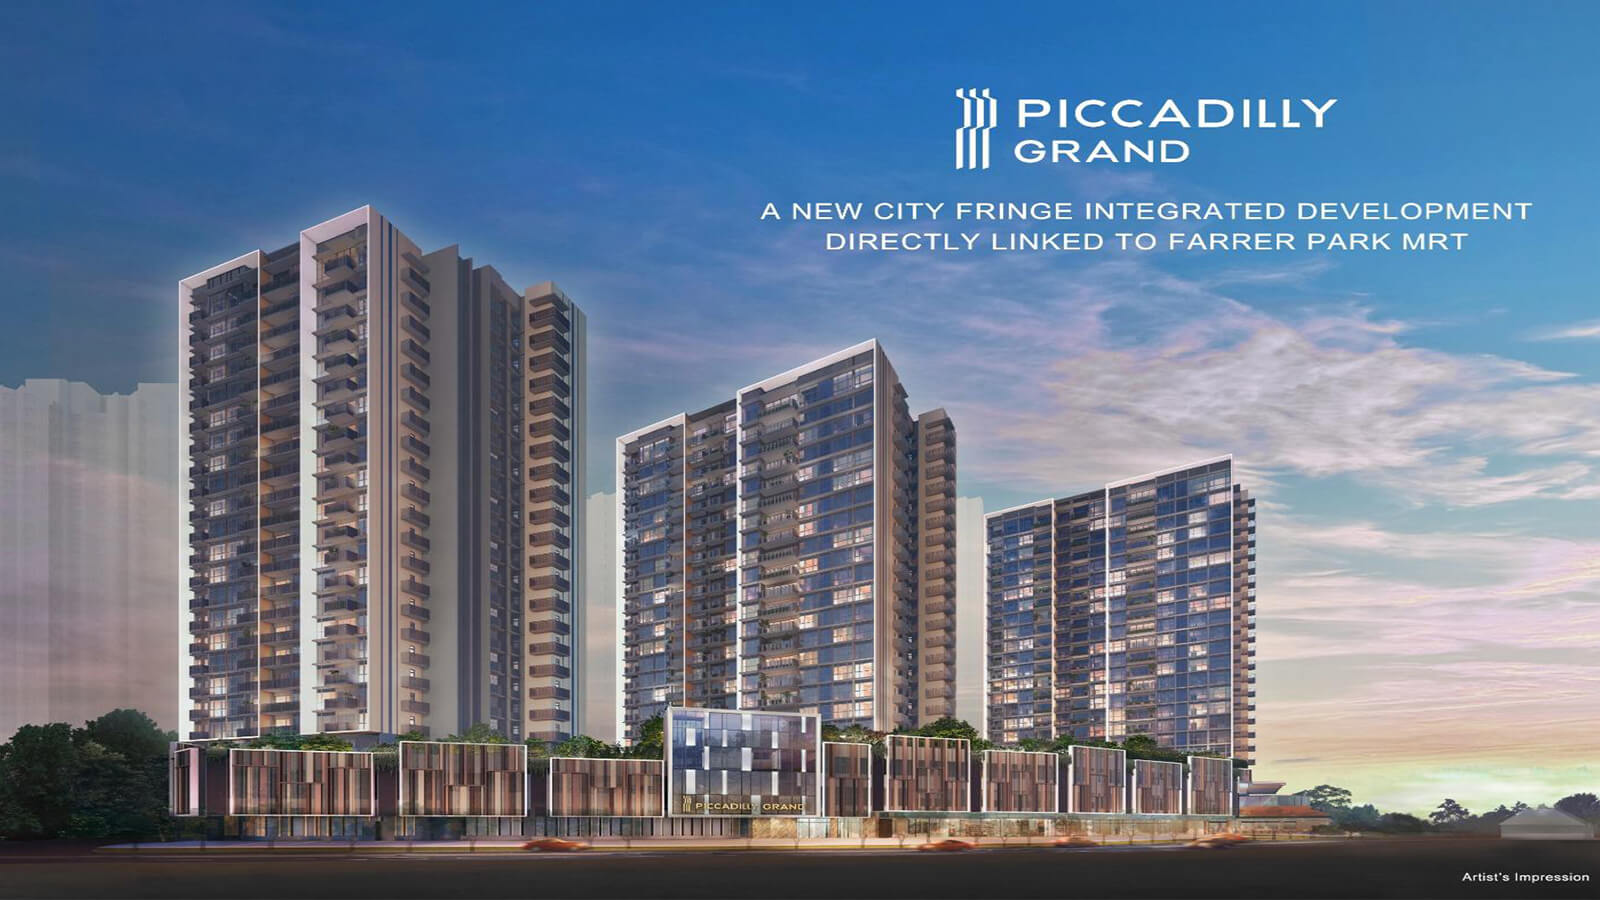 Piccadilly Grand feature Image